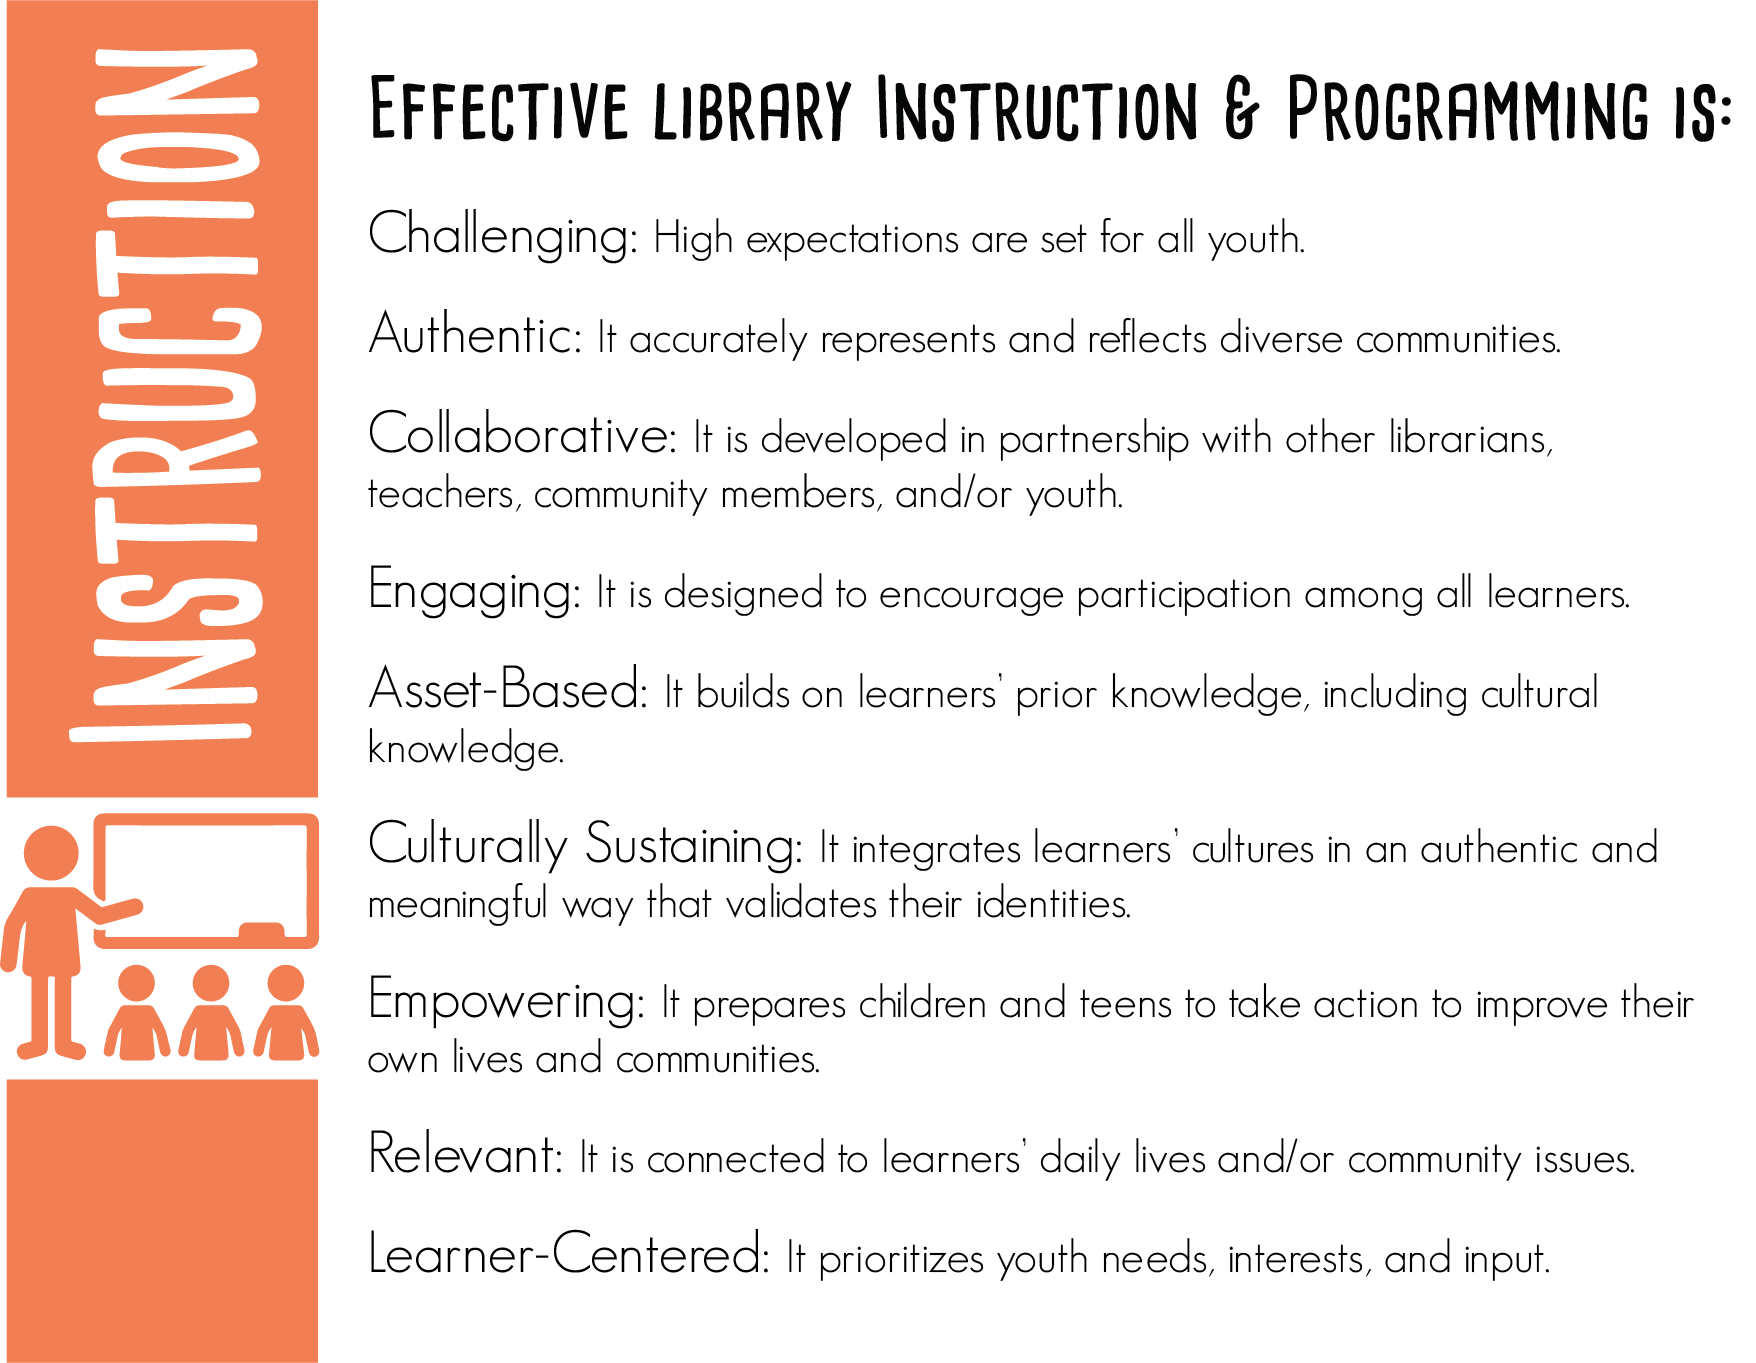 Effective library instruction and programming is: ➢ Challenging: High expectations are set for all youth. ➢ Authentic: It accurately represents and reflects the breadth and complexity of diverse communities. ➢ Collaborative: It is developed in partnership with other librarians, community members, and/or youth. ➢ Engaging: It is designed to encourage participation among all learners. ➢ Asset-Based: It builds on BIYOC’s prior knowledge, including cultural knowledge. ➢ Culturally Sustaining: It integrates youth cultures in an authentic and meaningful way that validates youth’s identities. ➢ Empowering: It prepares BIYOC to take action to improve their own lives and communities. ➢ Relevant: It is connected to youth’s daily lives and/or community issues. ➢ Youth-Centered: It prioritizes BIYOC’s needs, interests, and input.